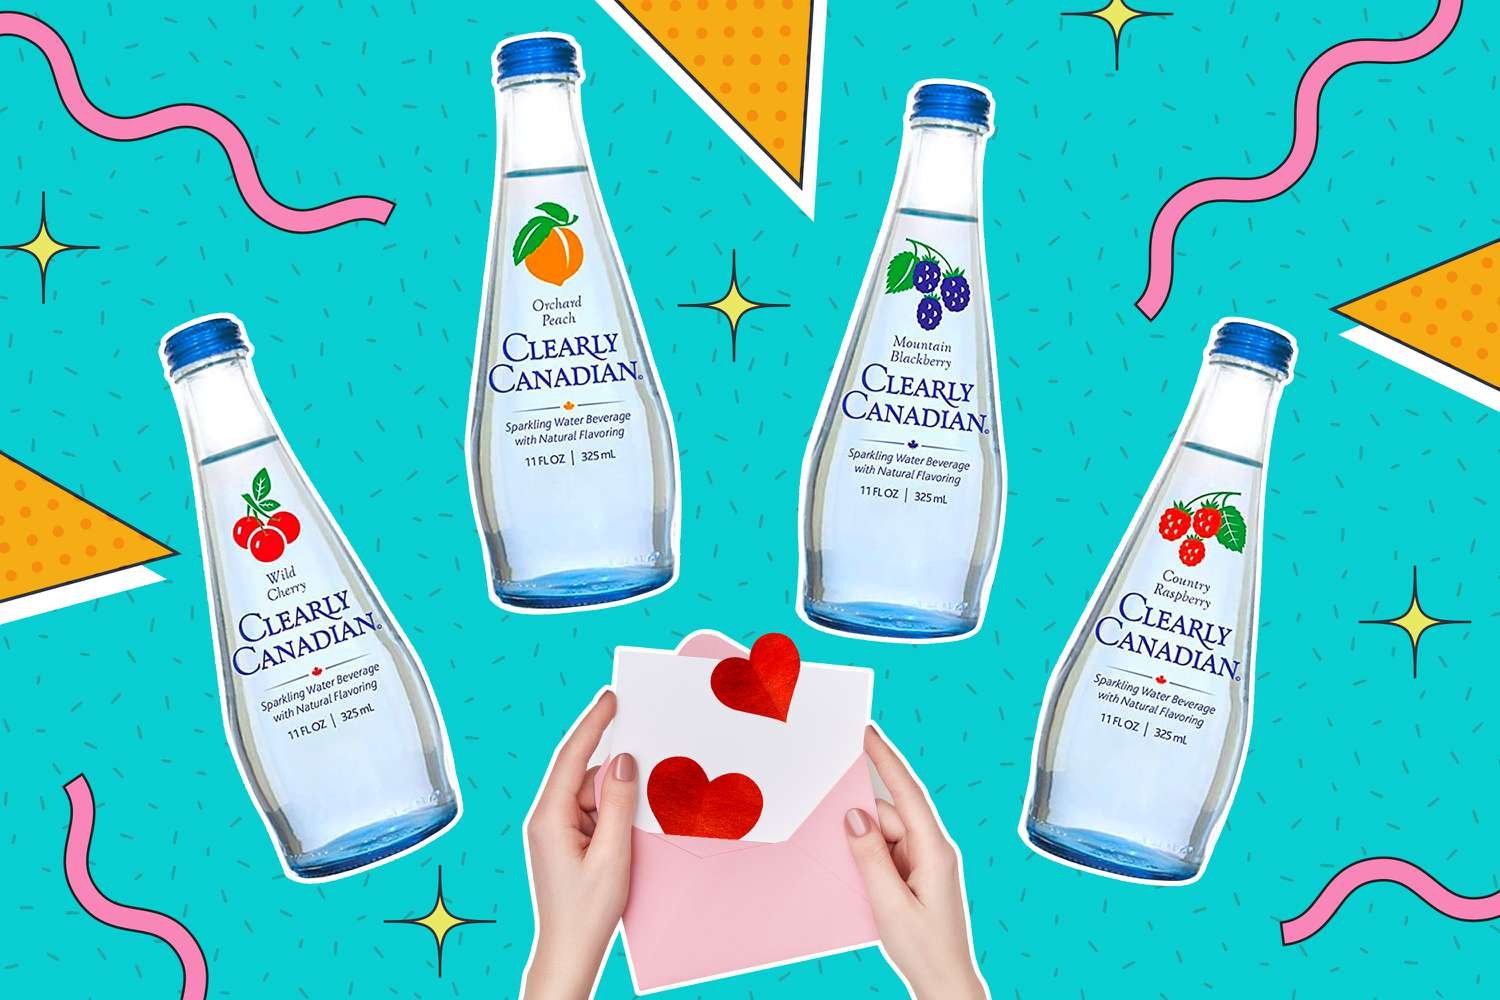 In the '90s, Nothing Was More Glamorous Than Clearly Canadian